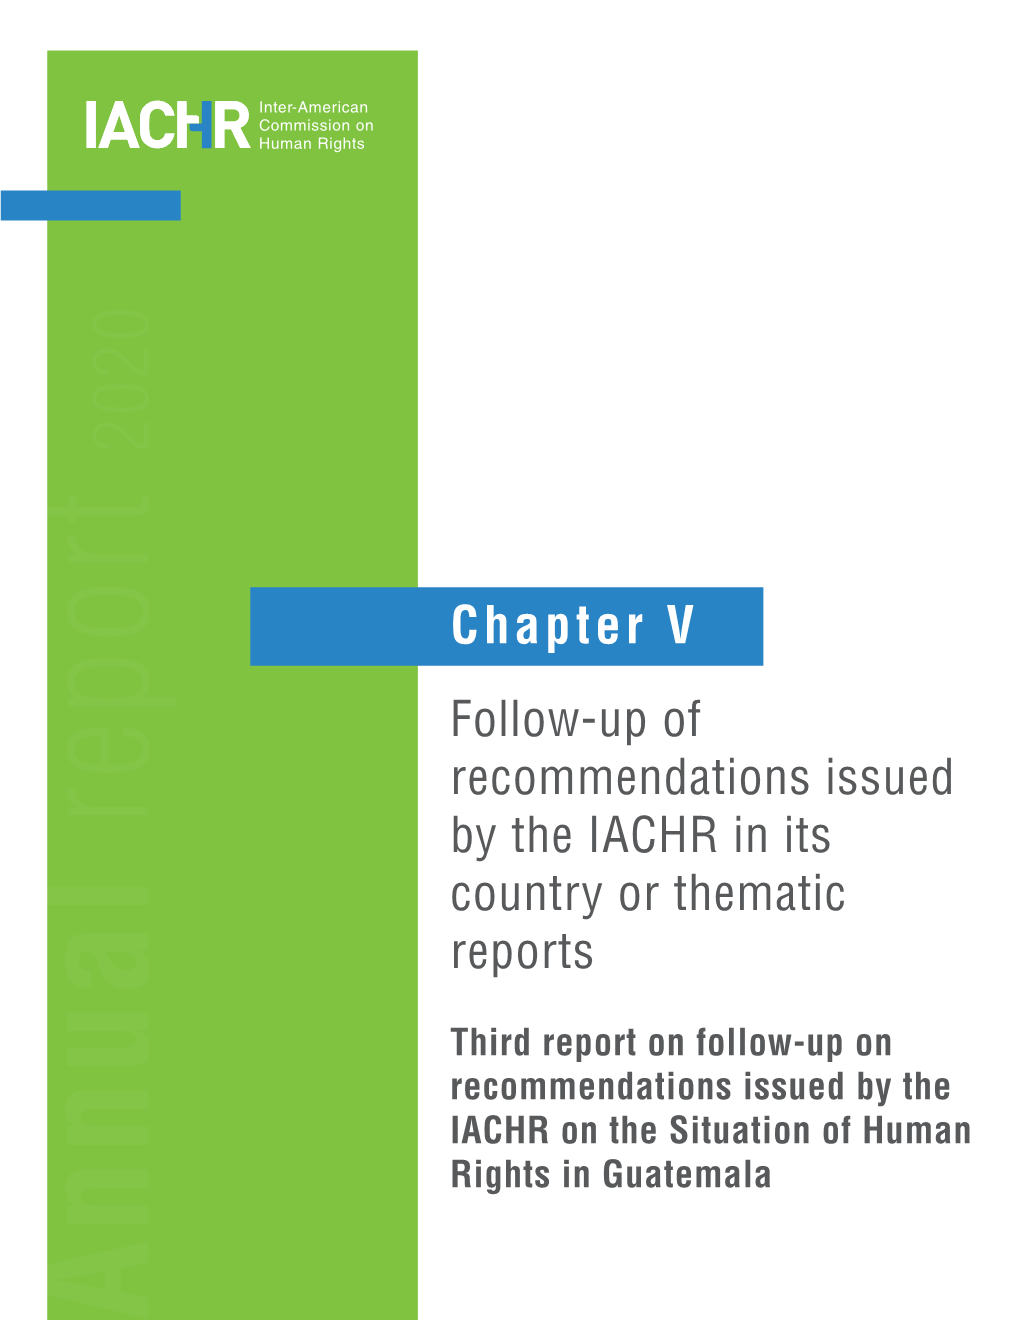 Chapter V Follow-Up of Recommendations Issued Report by the IACHR in Its Country Or Thematic Reports